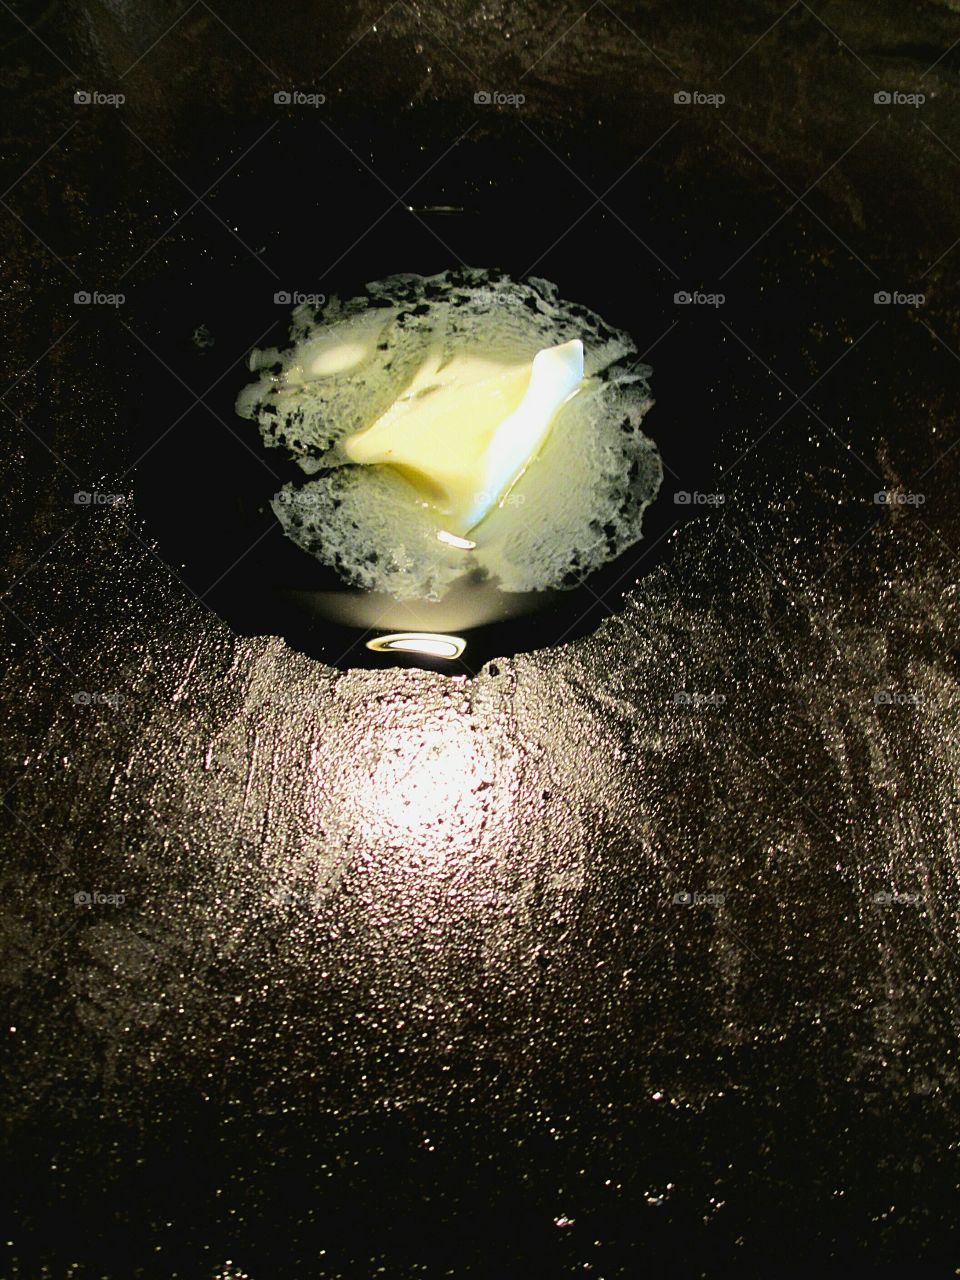 Butter melting on a frying pan